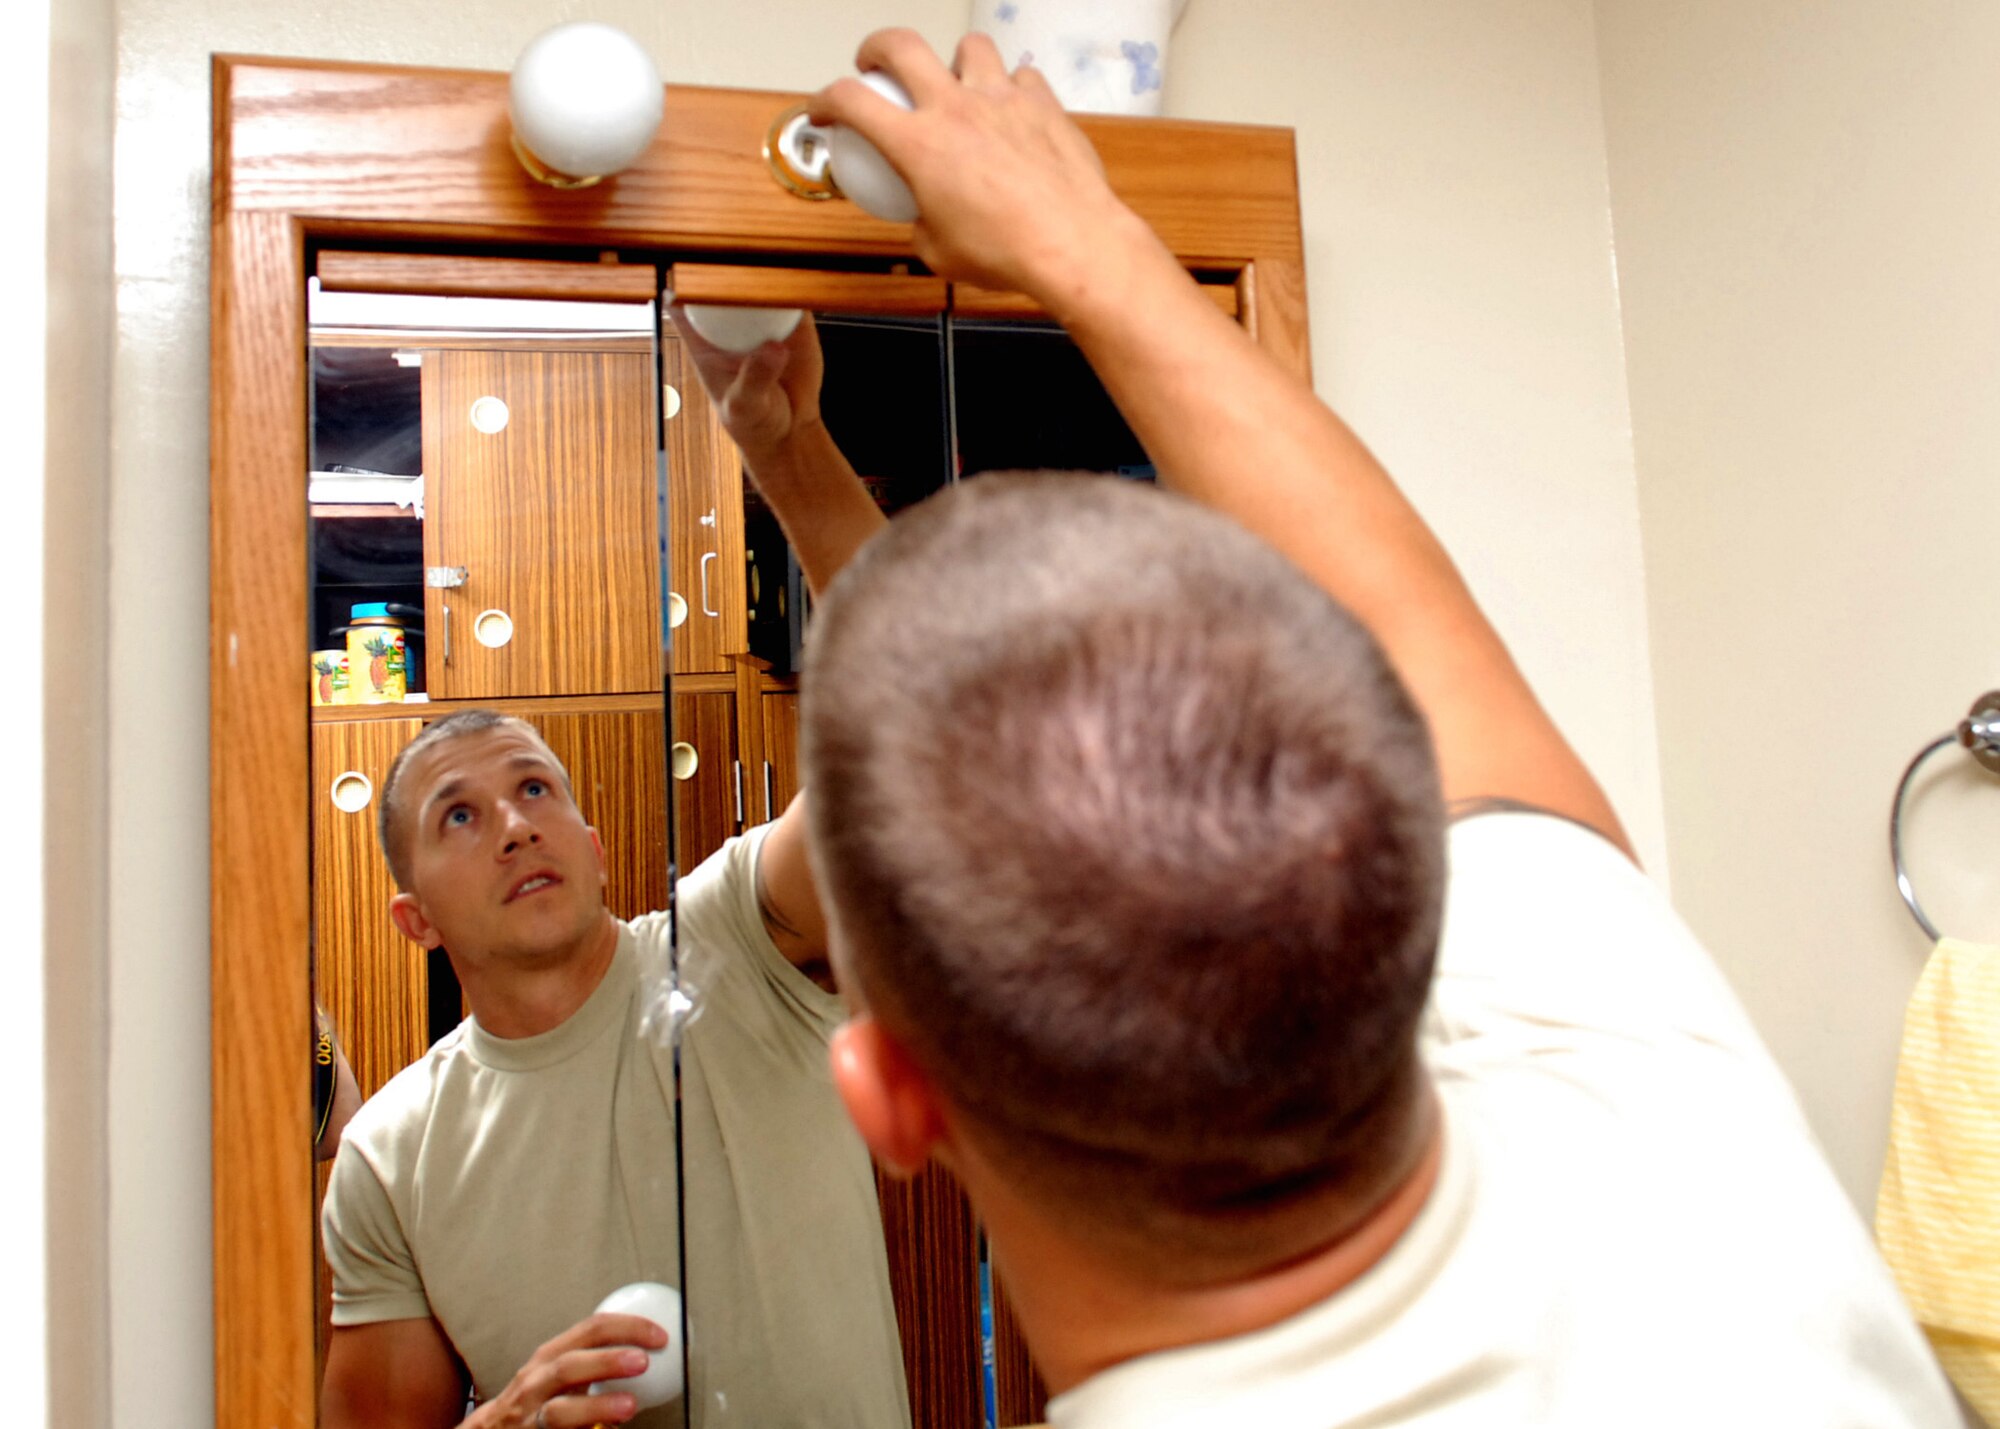 Tech. Sgt. Jeremy Arthur, 718th Civil Engineer Squadron dorm manager , changes light bulbs to new compact fluorescent lights which save money and energy. There are over 500 bulbs total being changed to eco friendly light bulbs in the dorms.  (U.S. Air Force photo/Junko Kinjo)